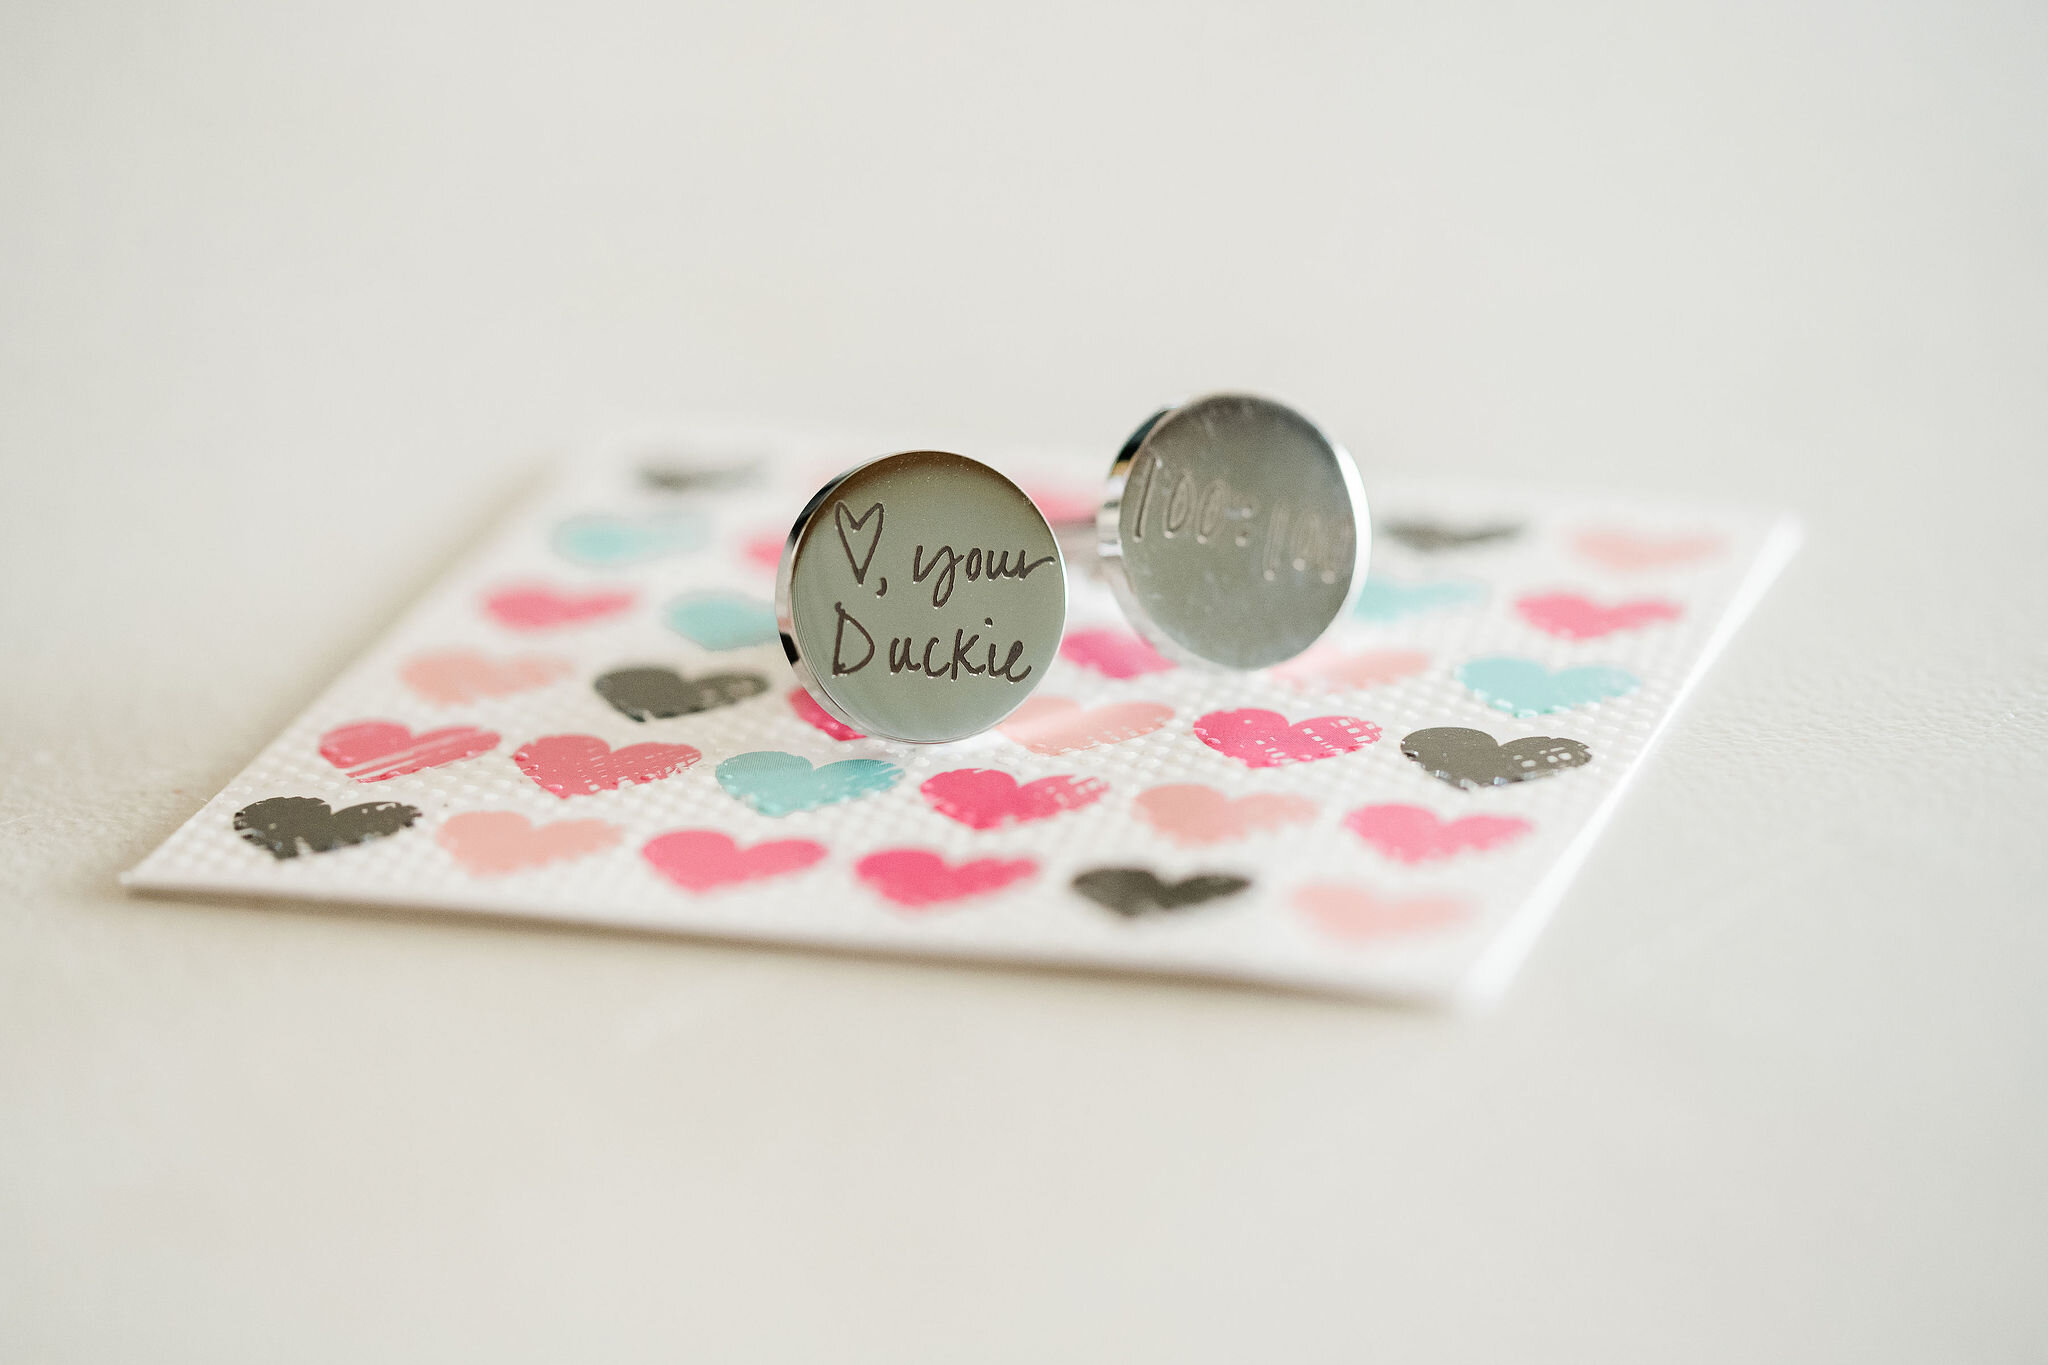 Personalized cufflinks on a card from the bride